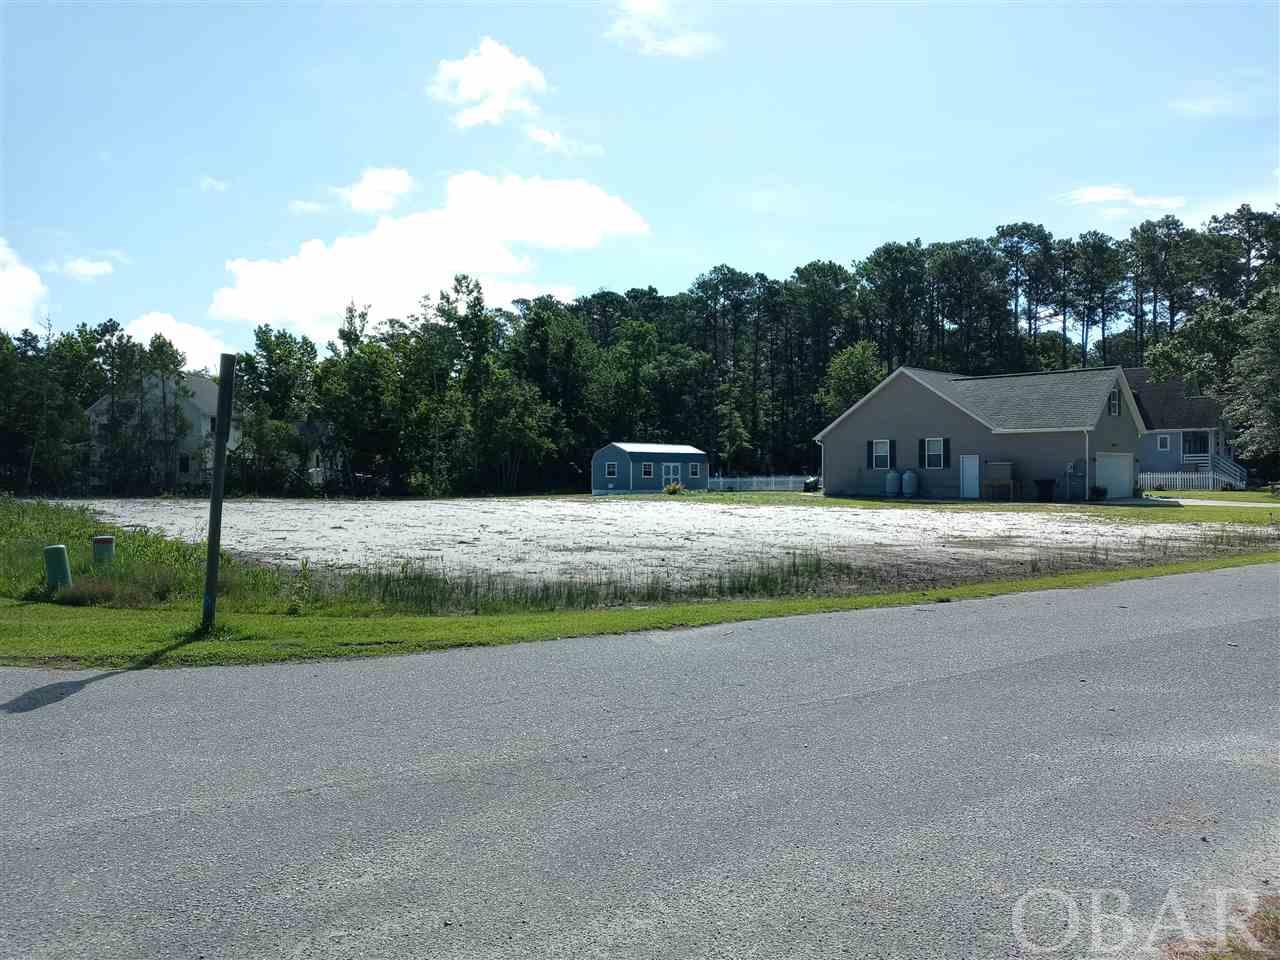 This X Flood zone lot is located in a small, serene, and beautiful neighborhood. Close to shopping and Manteo waterfront. This lot has recently been cleared and the water tap has been paid for by the sellers, it is ready to build your dream home.  Restrictive covenants do require a minimum of 1200 heated square footage. Drive by today and see for yourself how great it really is.